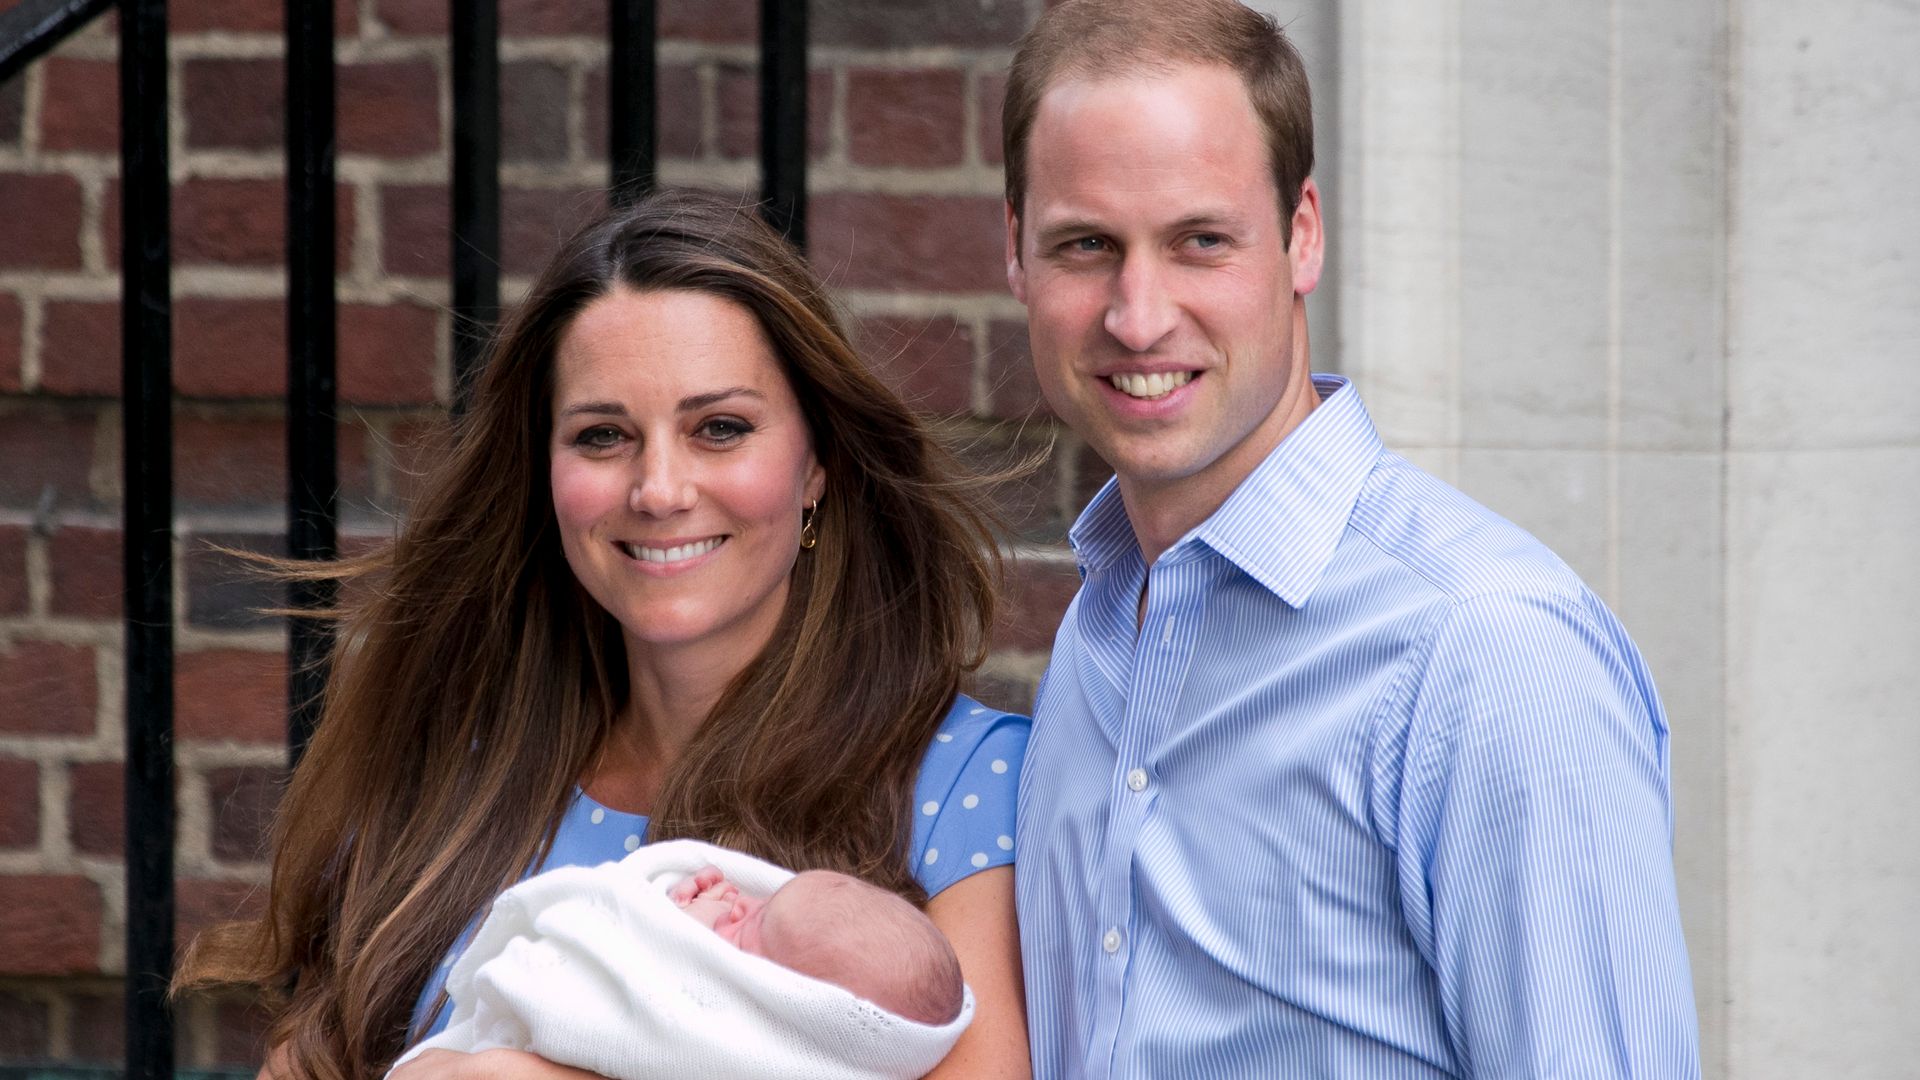 Prince William, Duke of Cambridge and Catherine, Duchess of Cambridge with their newborn son Prince George